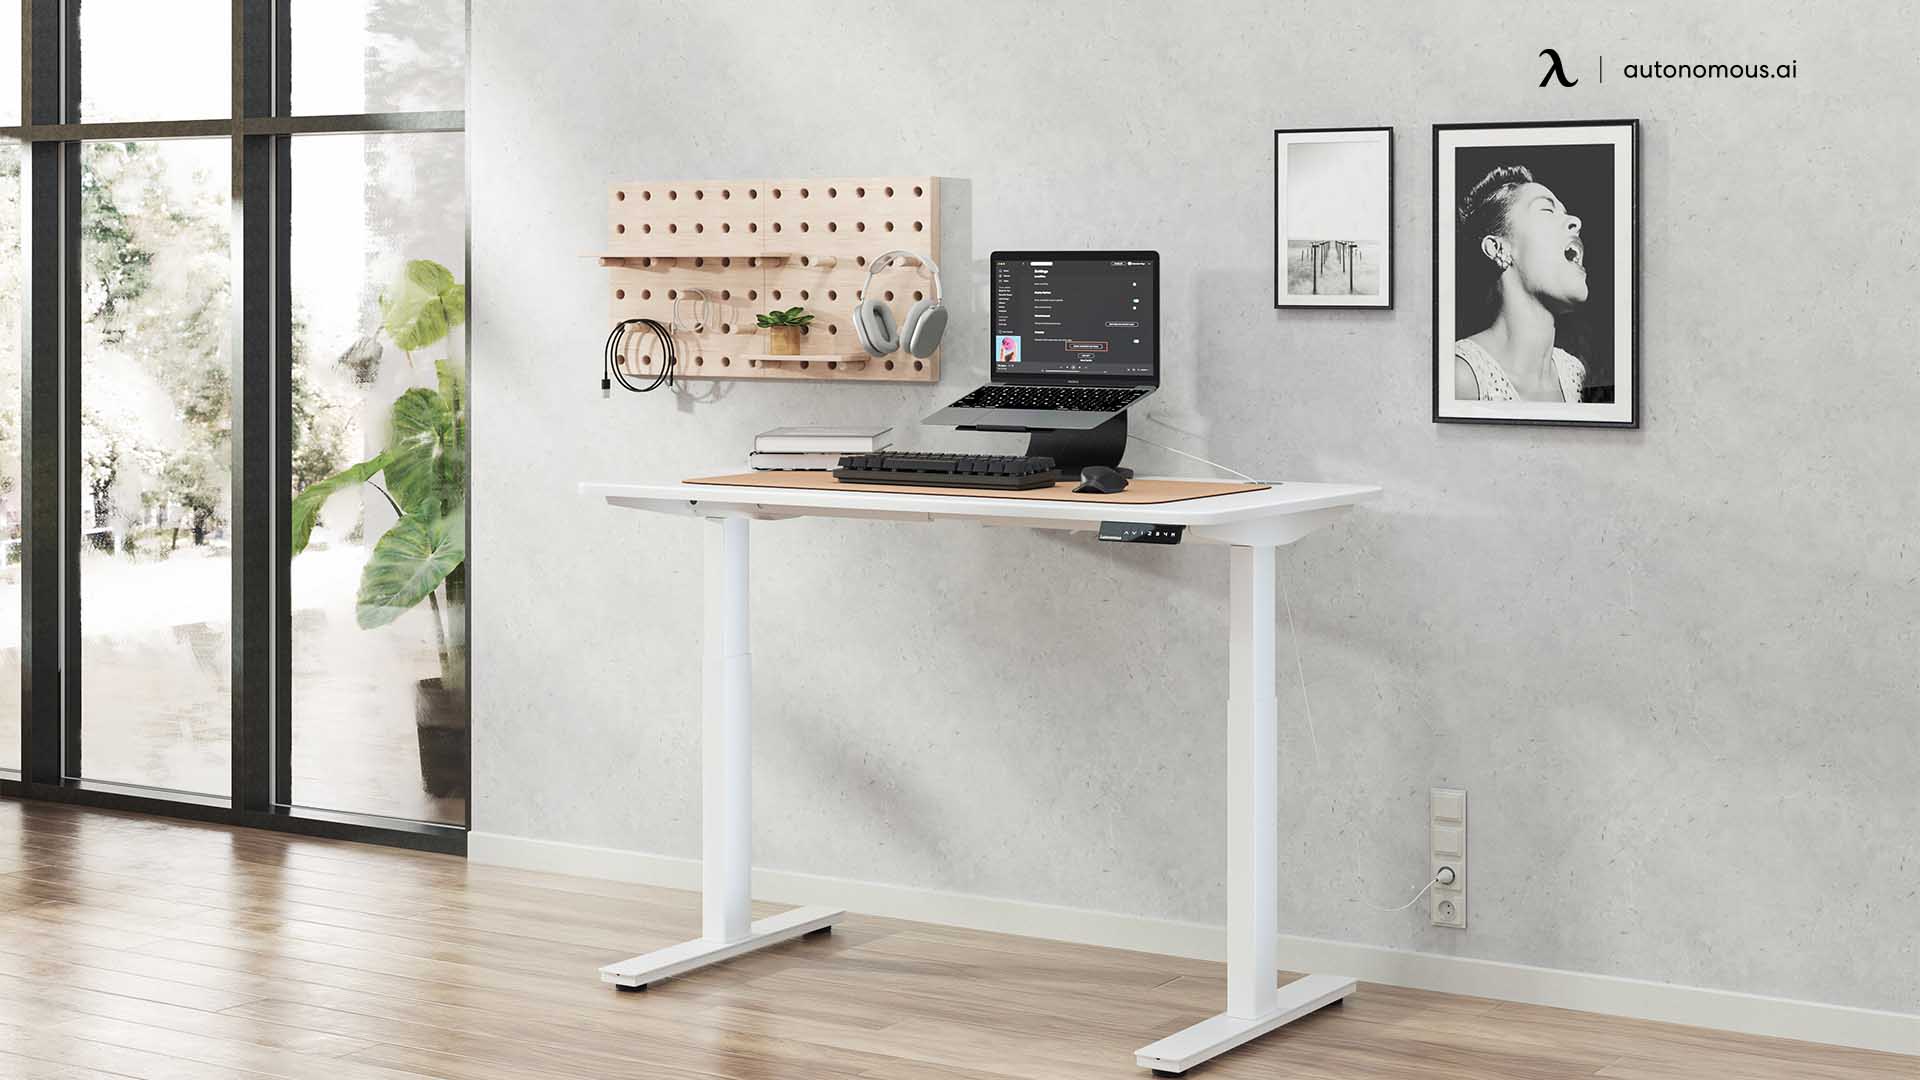 Use a Standing Desk and Ergonomic Chair